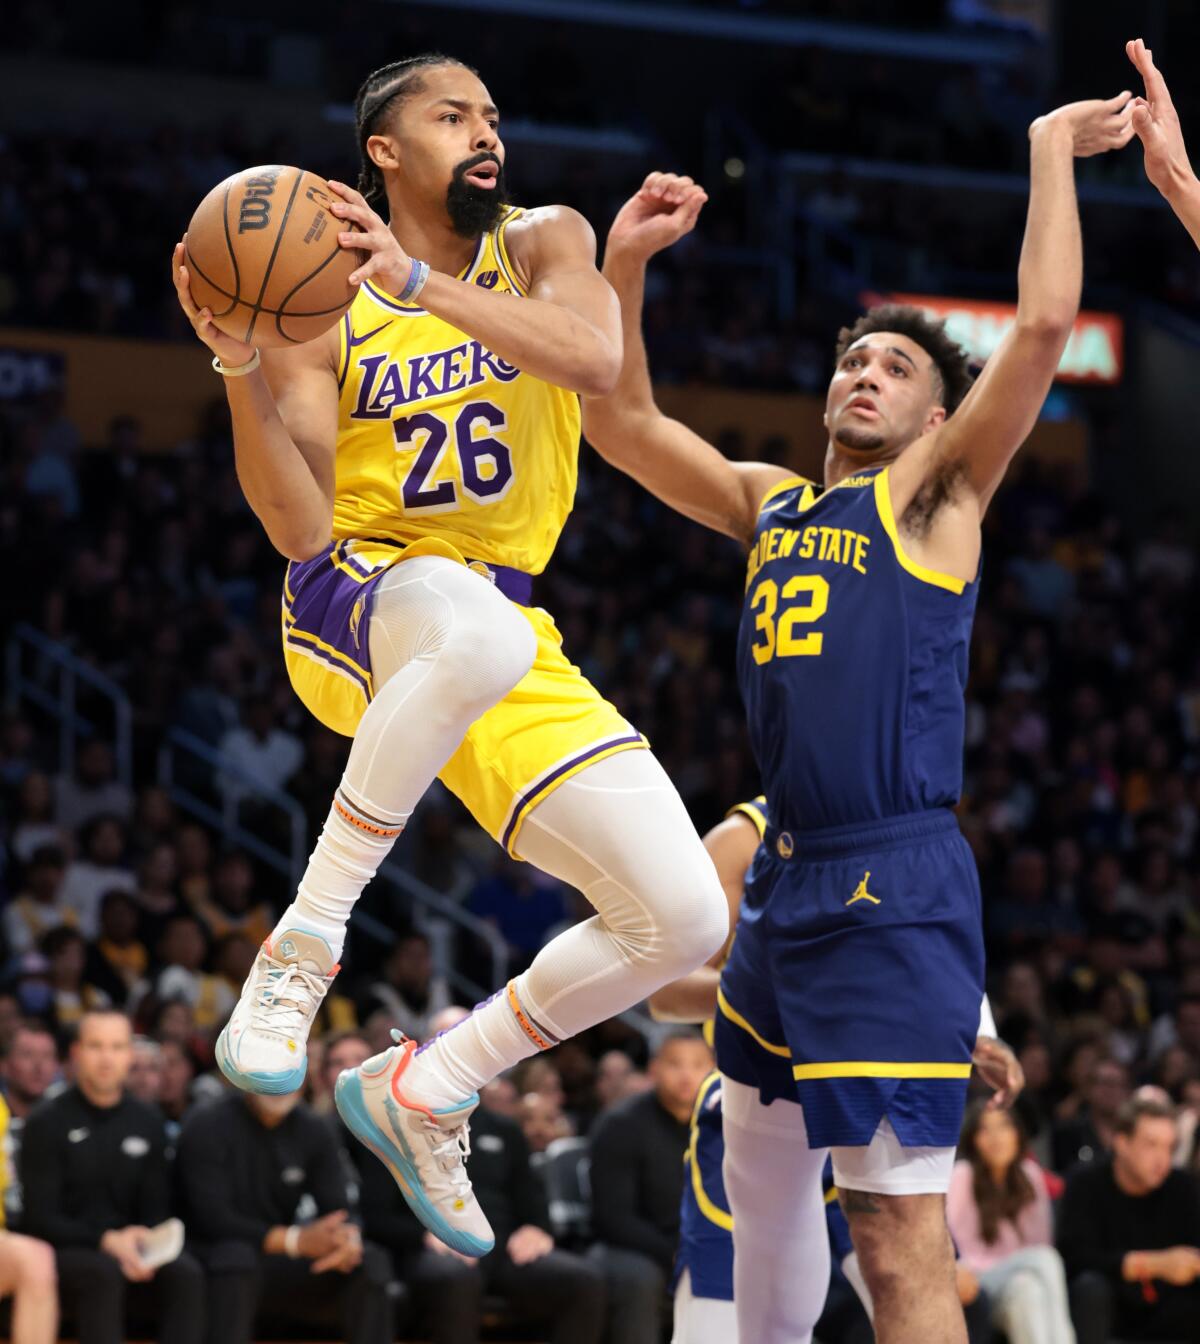 Lakers guard Spencer Dinwiddie leaps along the baseline to make a pass during the game against the Warriors on Tuesday.